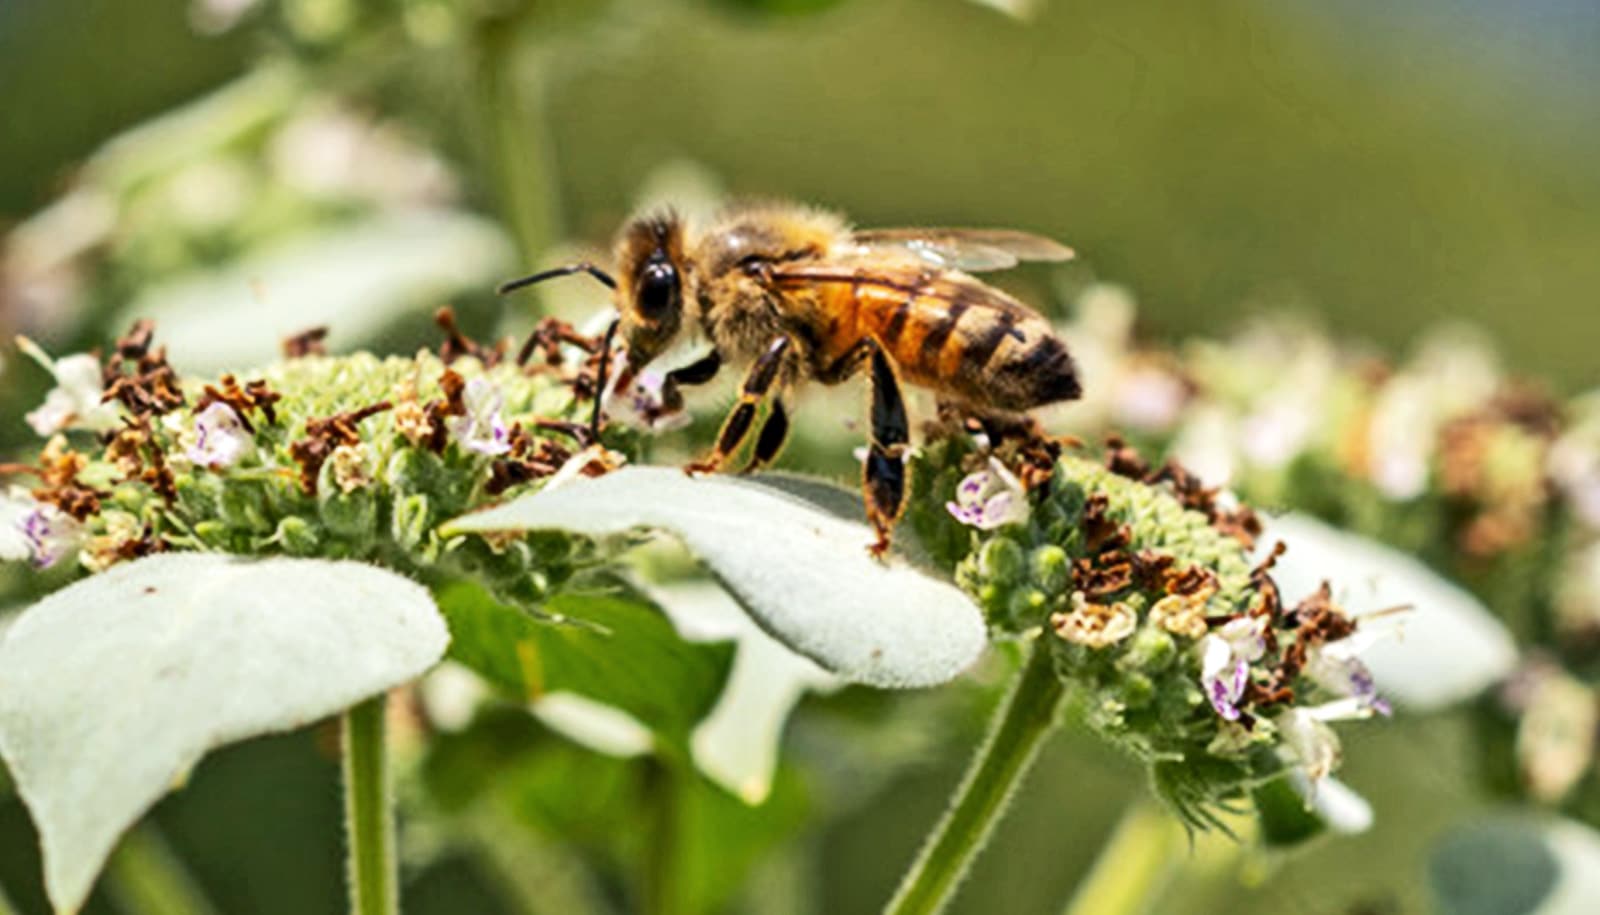 Insecticides have gotten way more toxic to honey bees